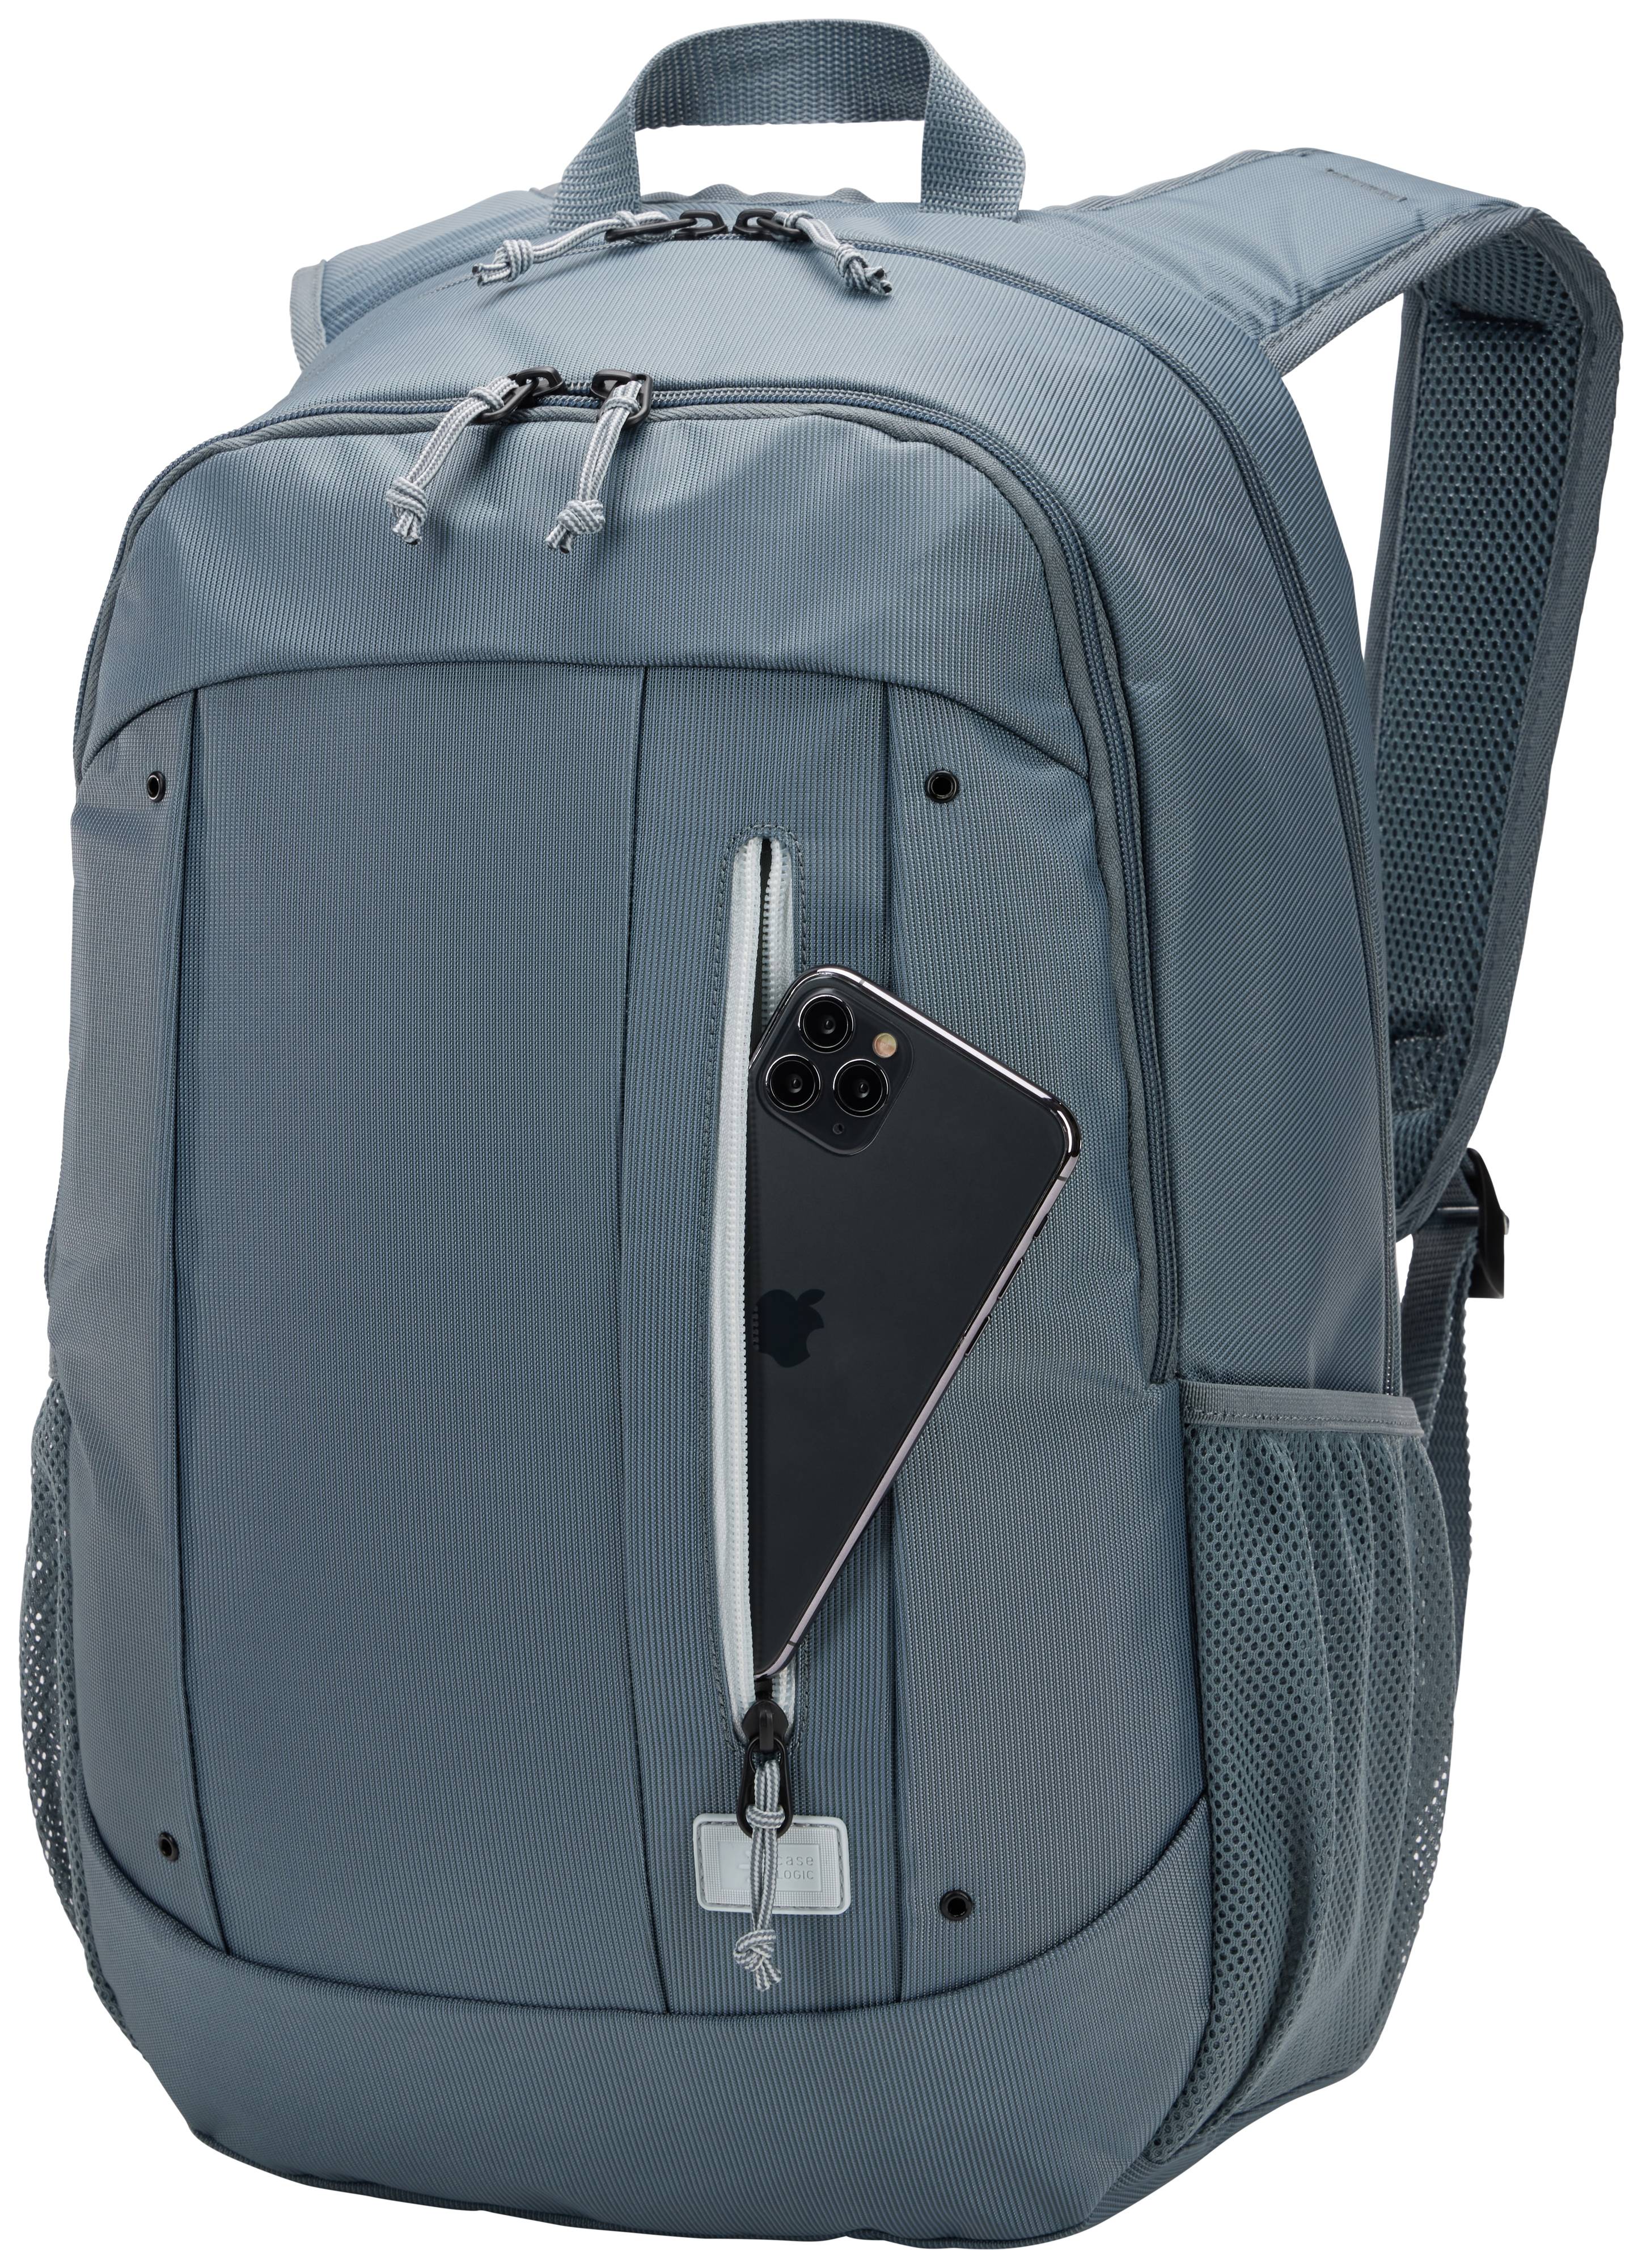 Rca Informatique - image du produit : JAUNT RECYCLED BACKPACK 15.6IN STORMY WEATHER